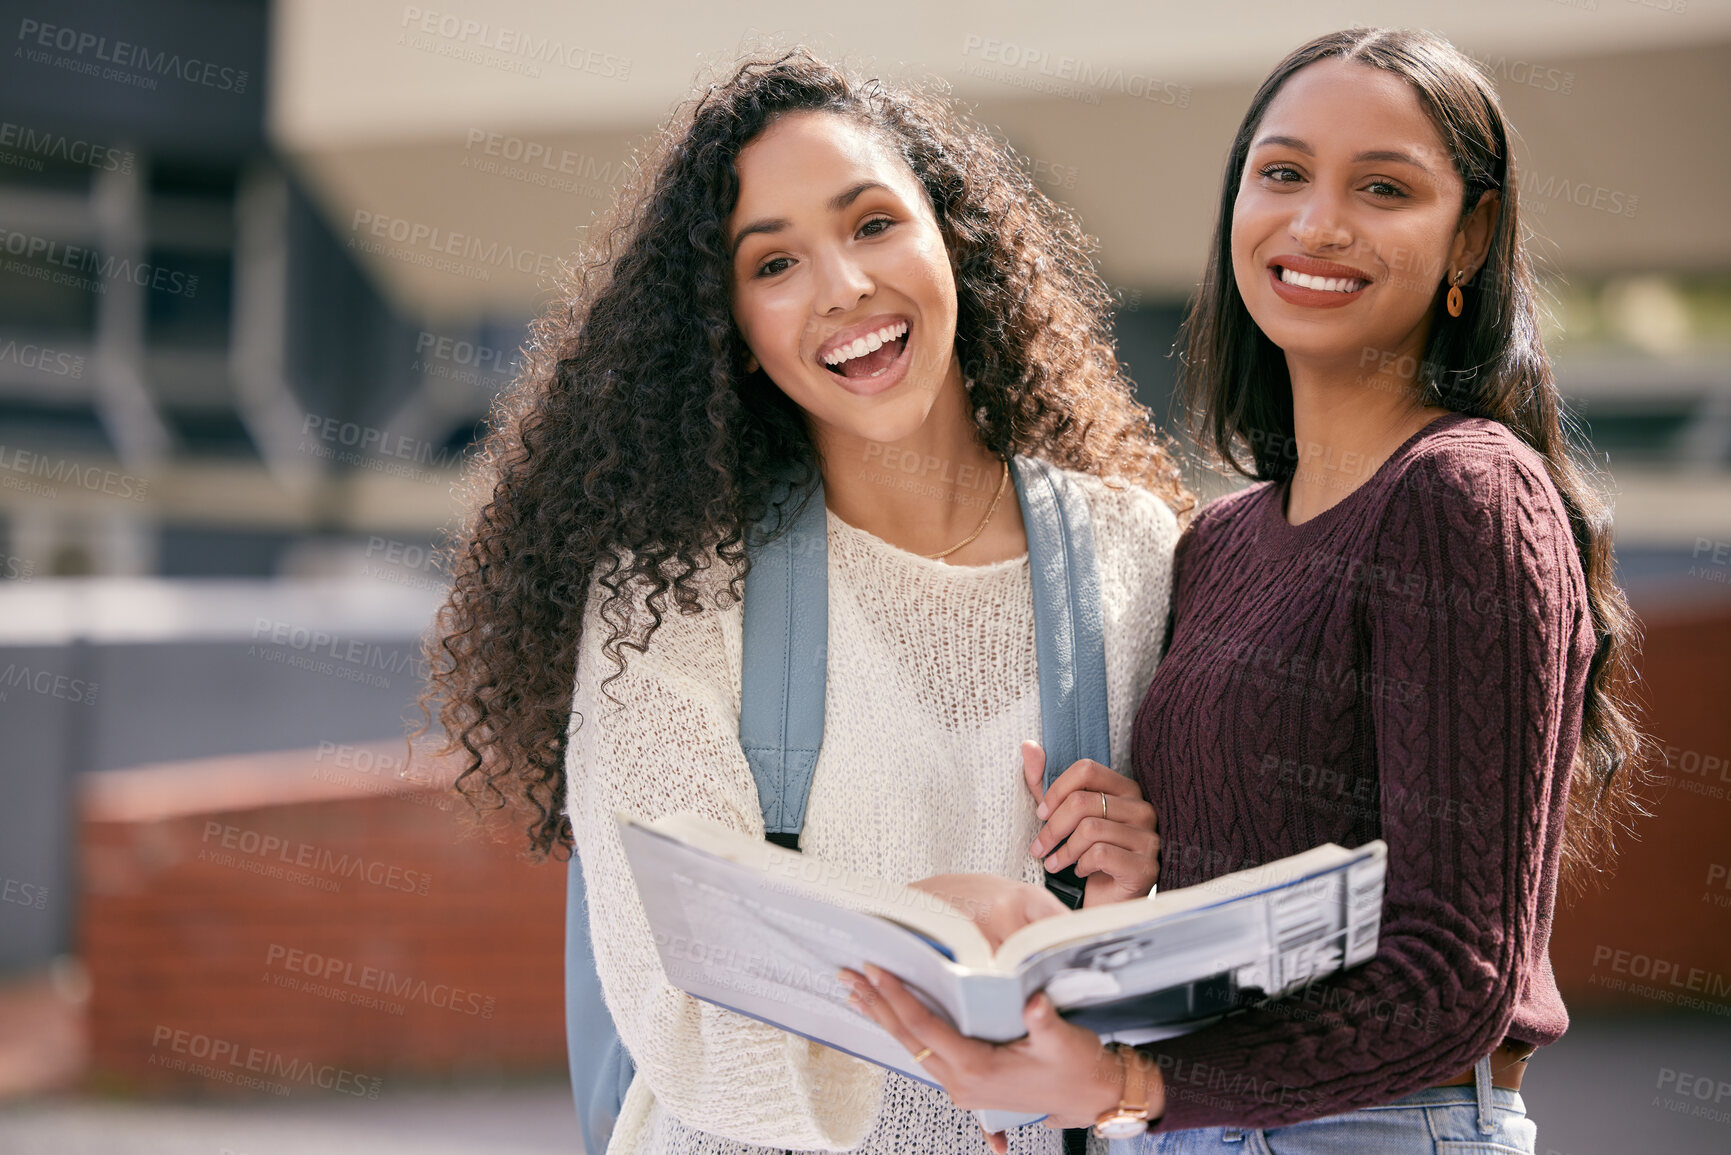 Buy stock photo Book, university and portrait of female students studying for a test outdoor on campus together. Happy, smile and women friends reading information in a textbook for an assignment or exams at college